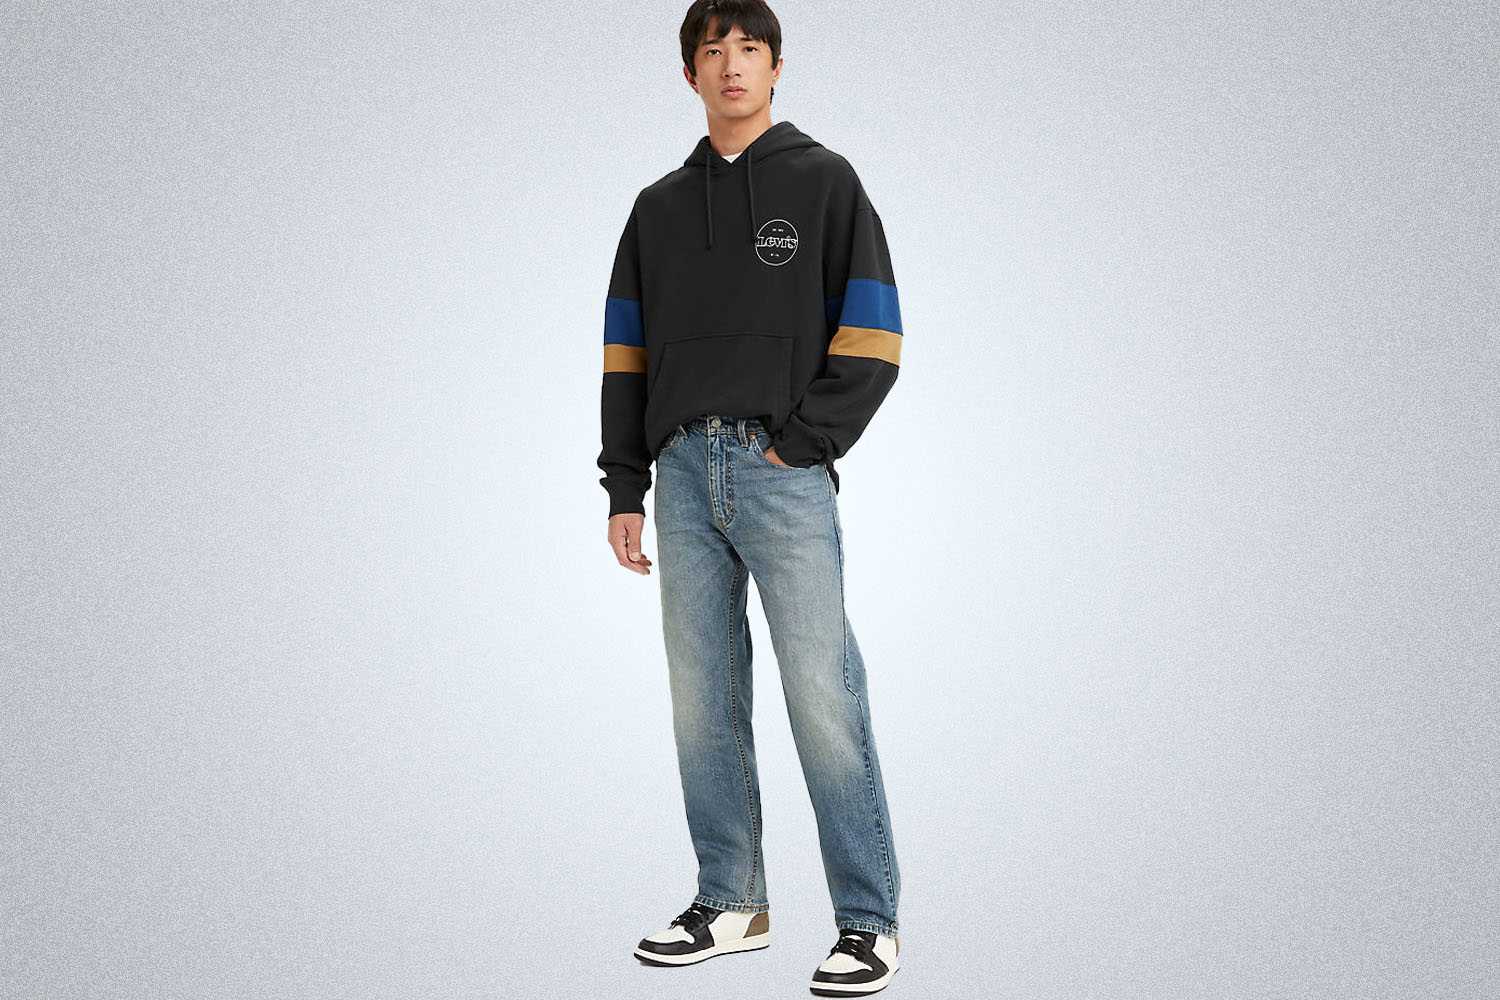 A model wearing Levi's apparel on a grey background 